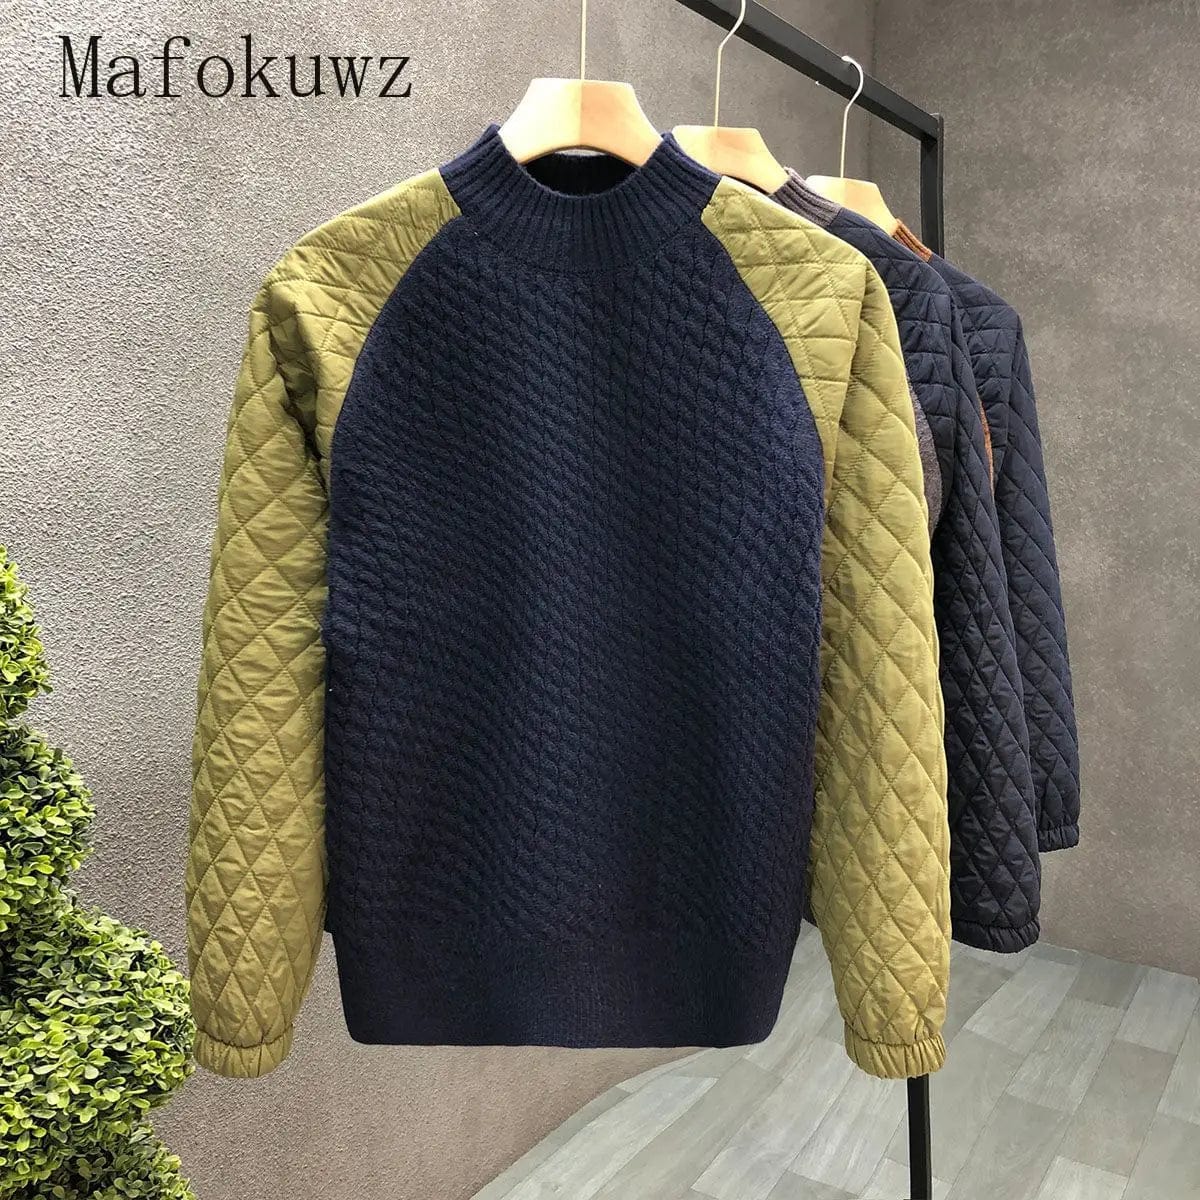 Winter Personalized Splicing Half Turtleneck Sweater Fashion Loose Casual High Street Knitted Bottoming Pullovers Male Clothes